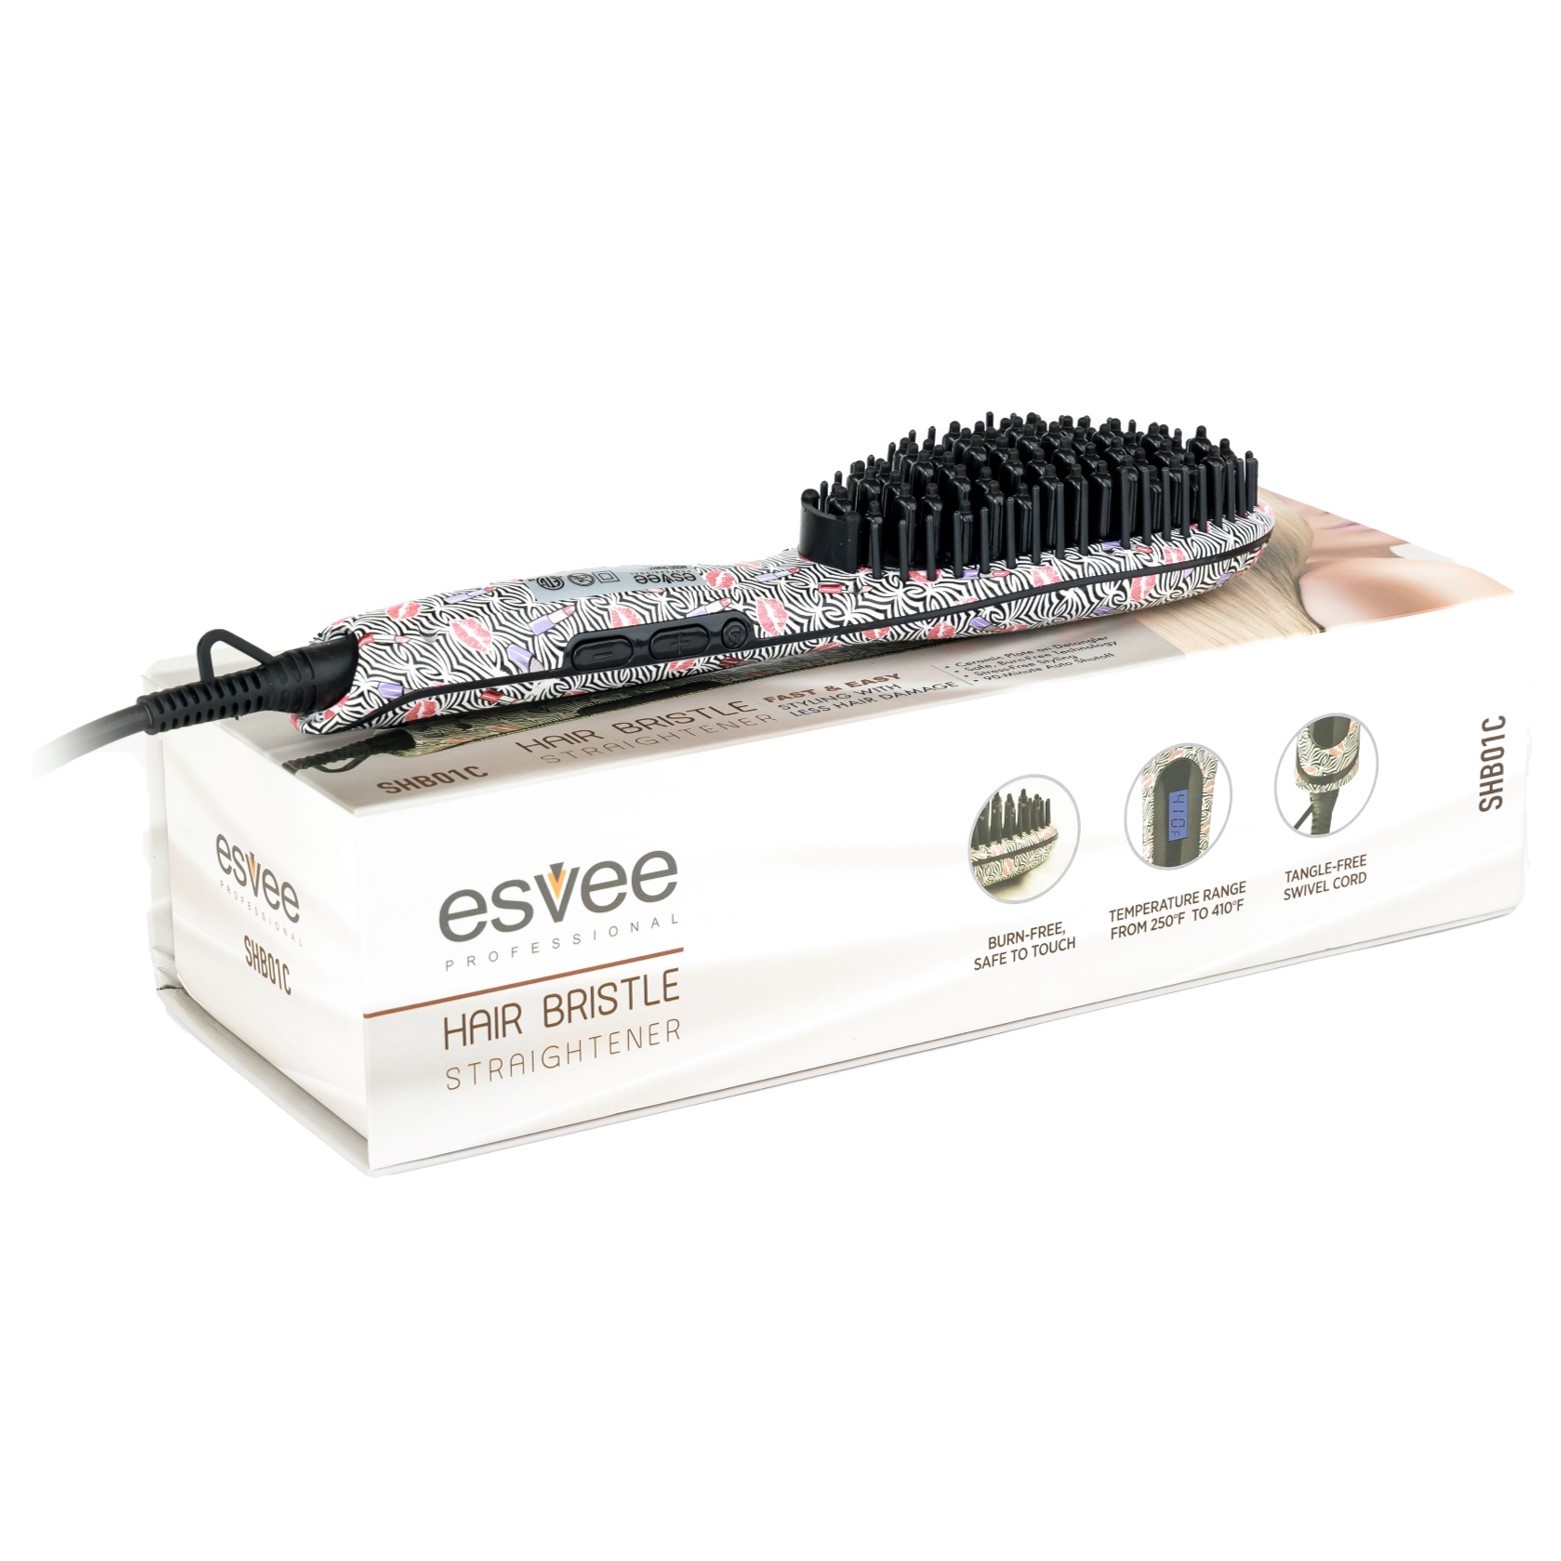 Esvee Professional Hair Bristle Straightener - Ceramic Heating Hair Straightener Brush with Anti-Frizz Technology, Auto-Off and 30s Heat-Up - Red